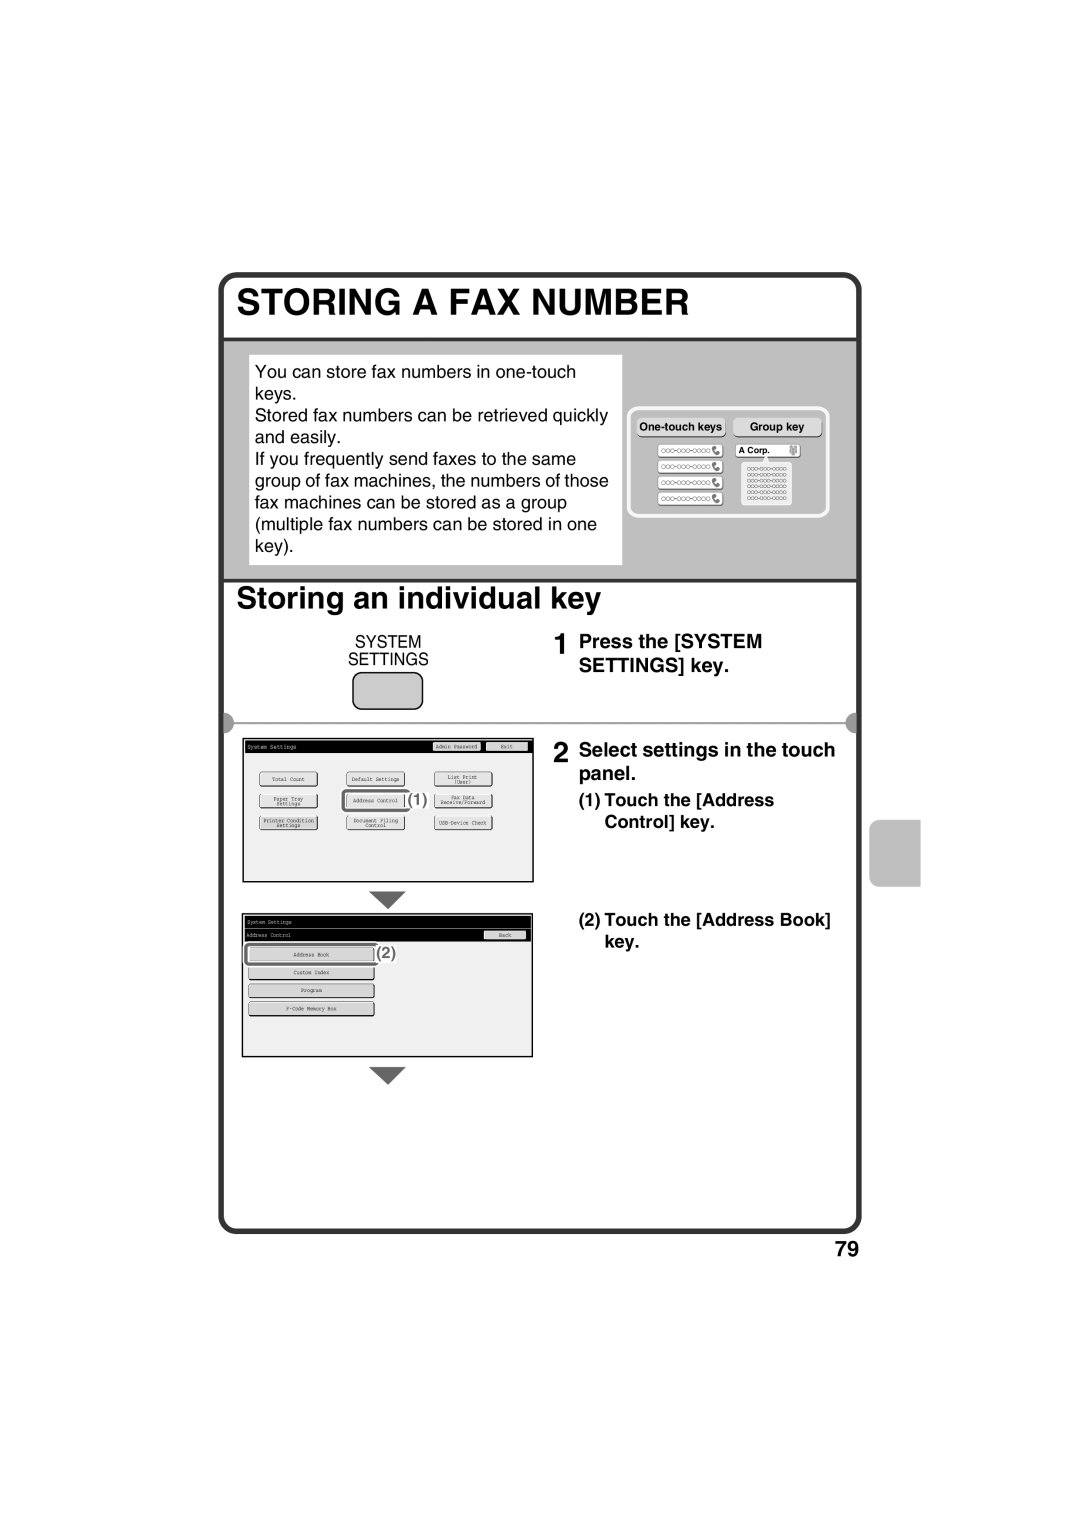 Sharp TINSE4377FCZZ, MX-B401 Storing A Fax Number, Storing an individual key, Touch the Address Control key, SETTINGS key 